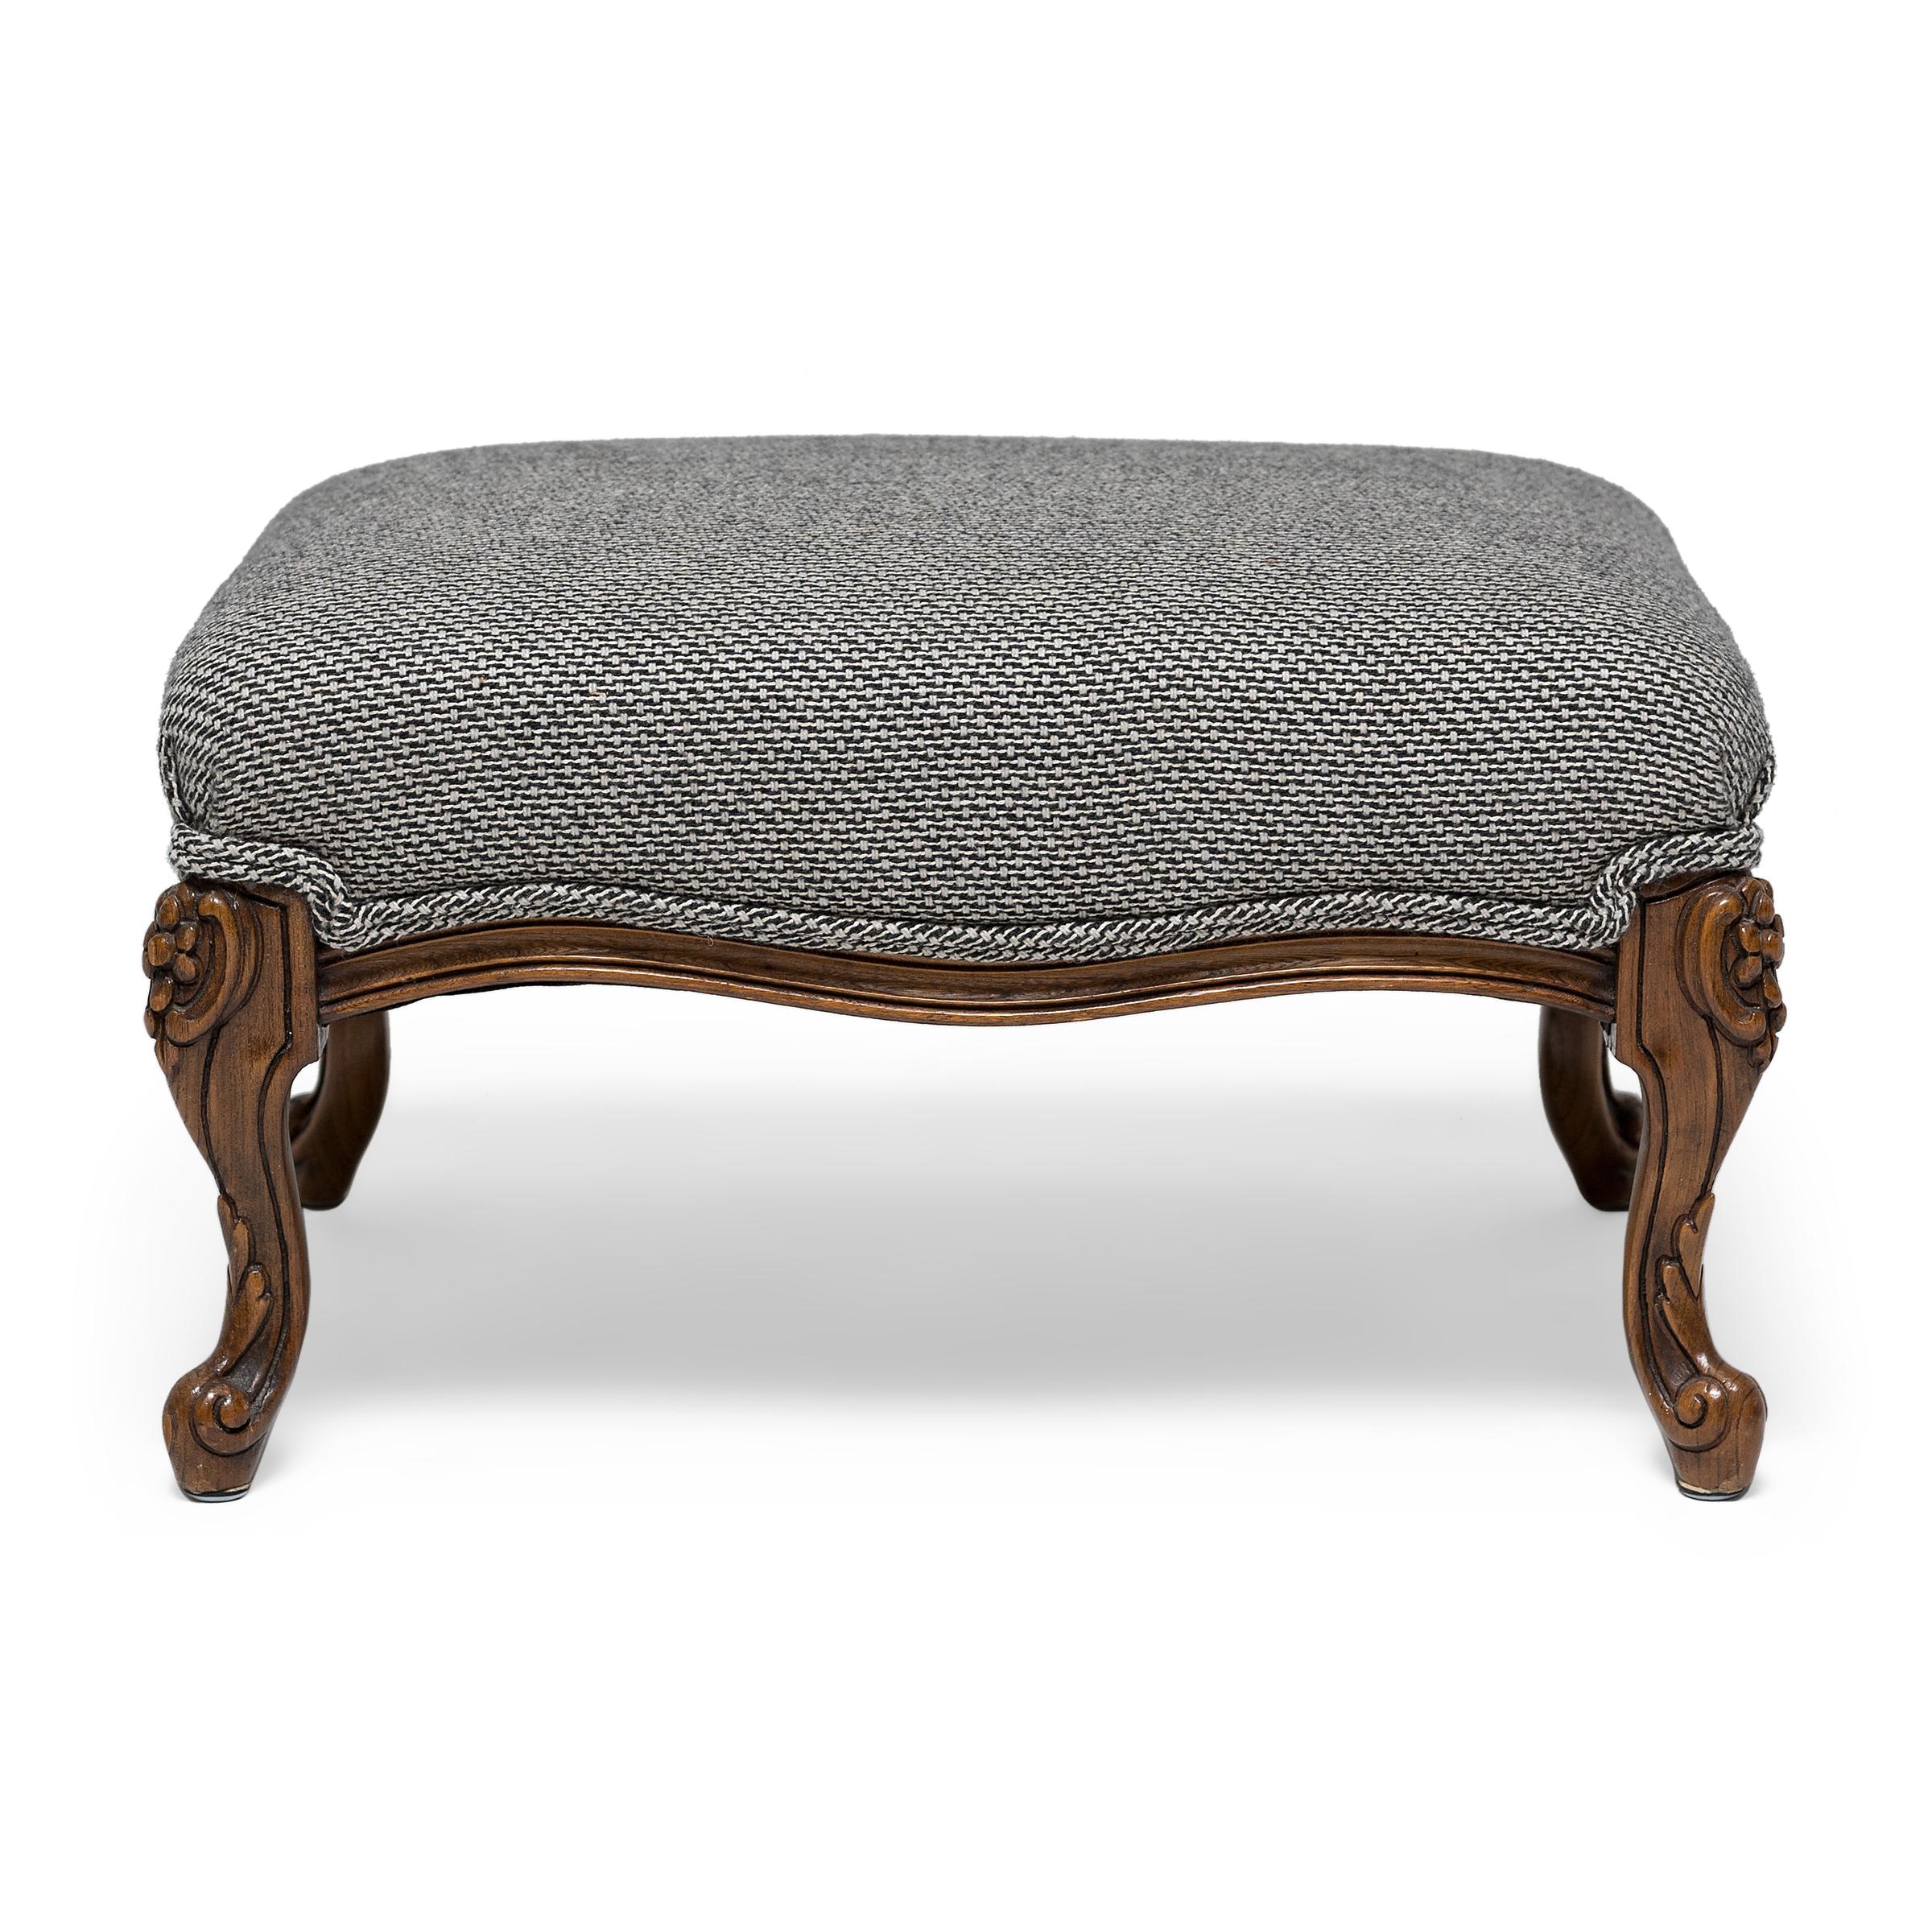 Carved French Louis XV Style Upholstered Footstool, c. 1850 For Sale